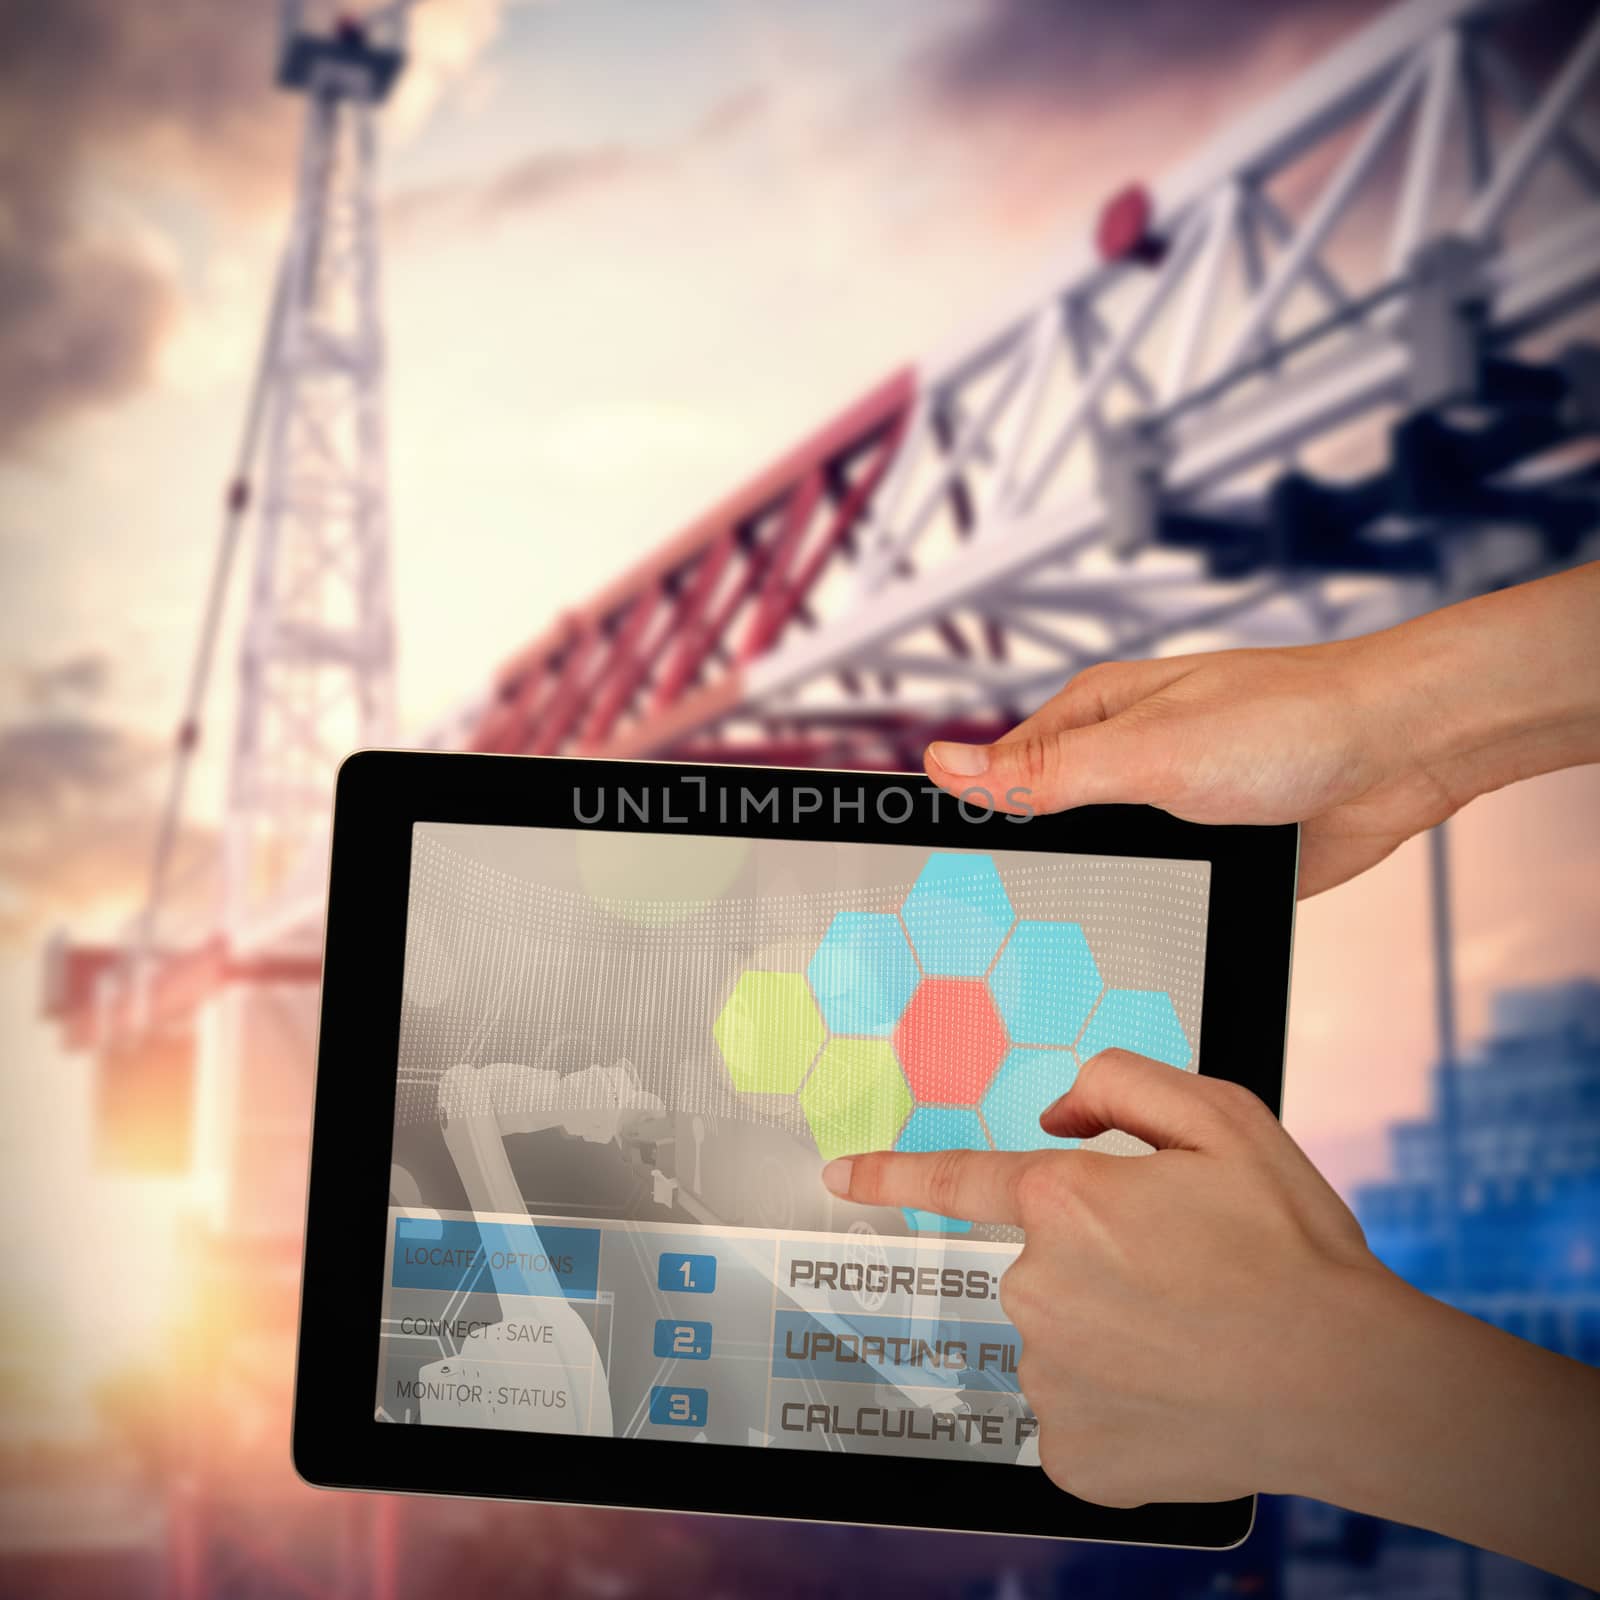 Hands touching digital tablet against white background against 3d image of crane in city during sunset